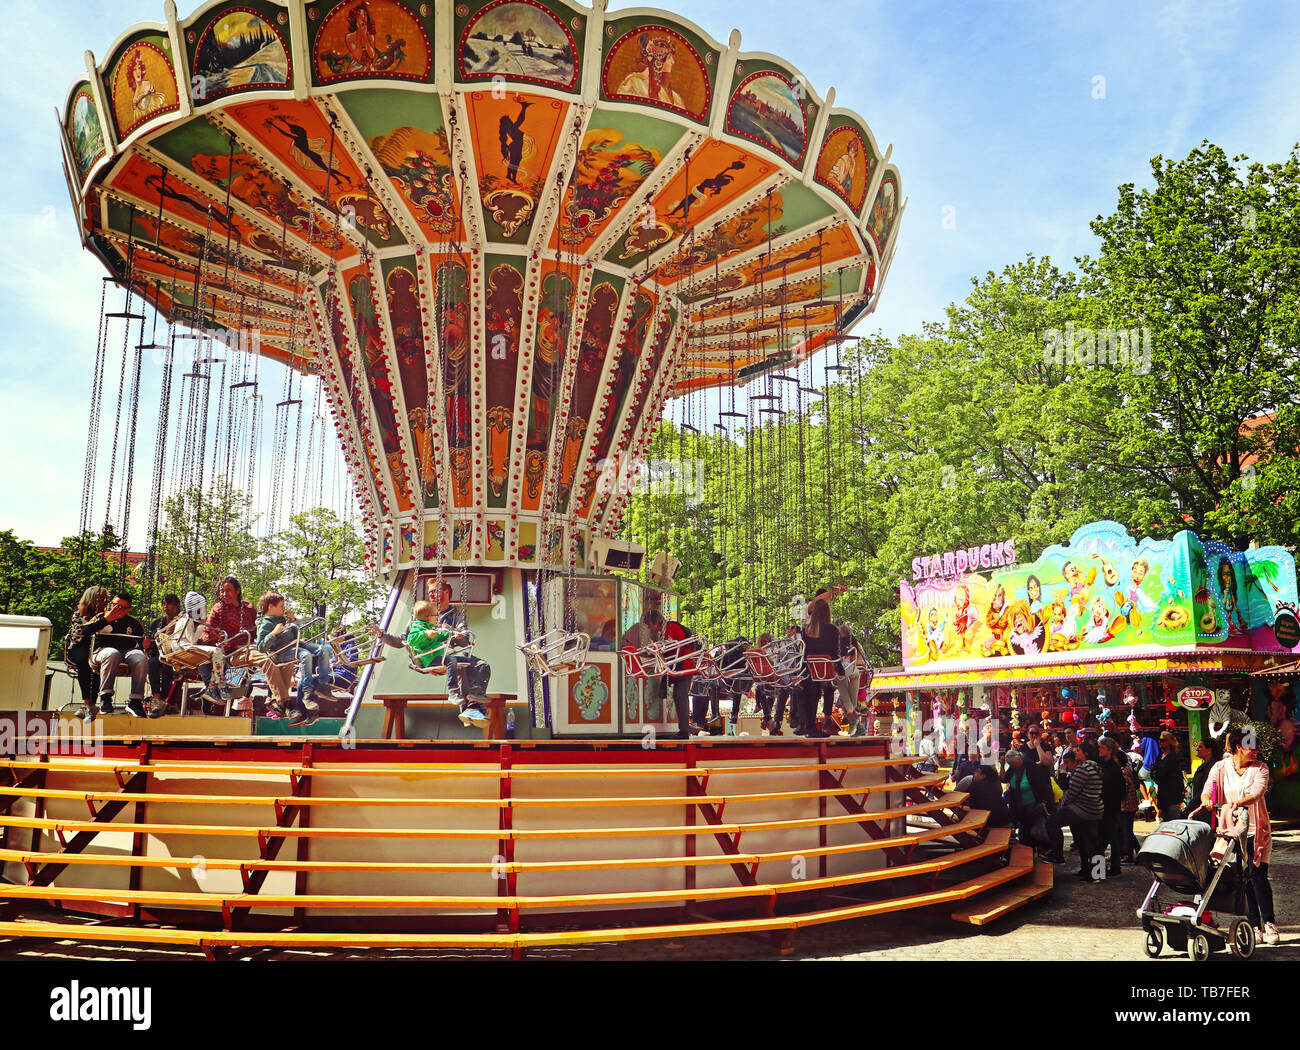 MUNICH, GERMANY - MAY 2, 2019   vintage carousel ride at the Auer Dult fair in Munich, market with amusement  attractions Stock Photo